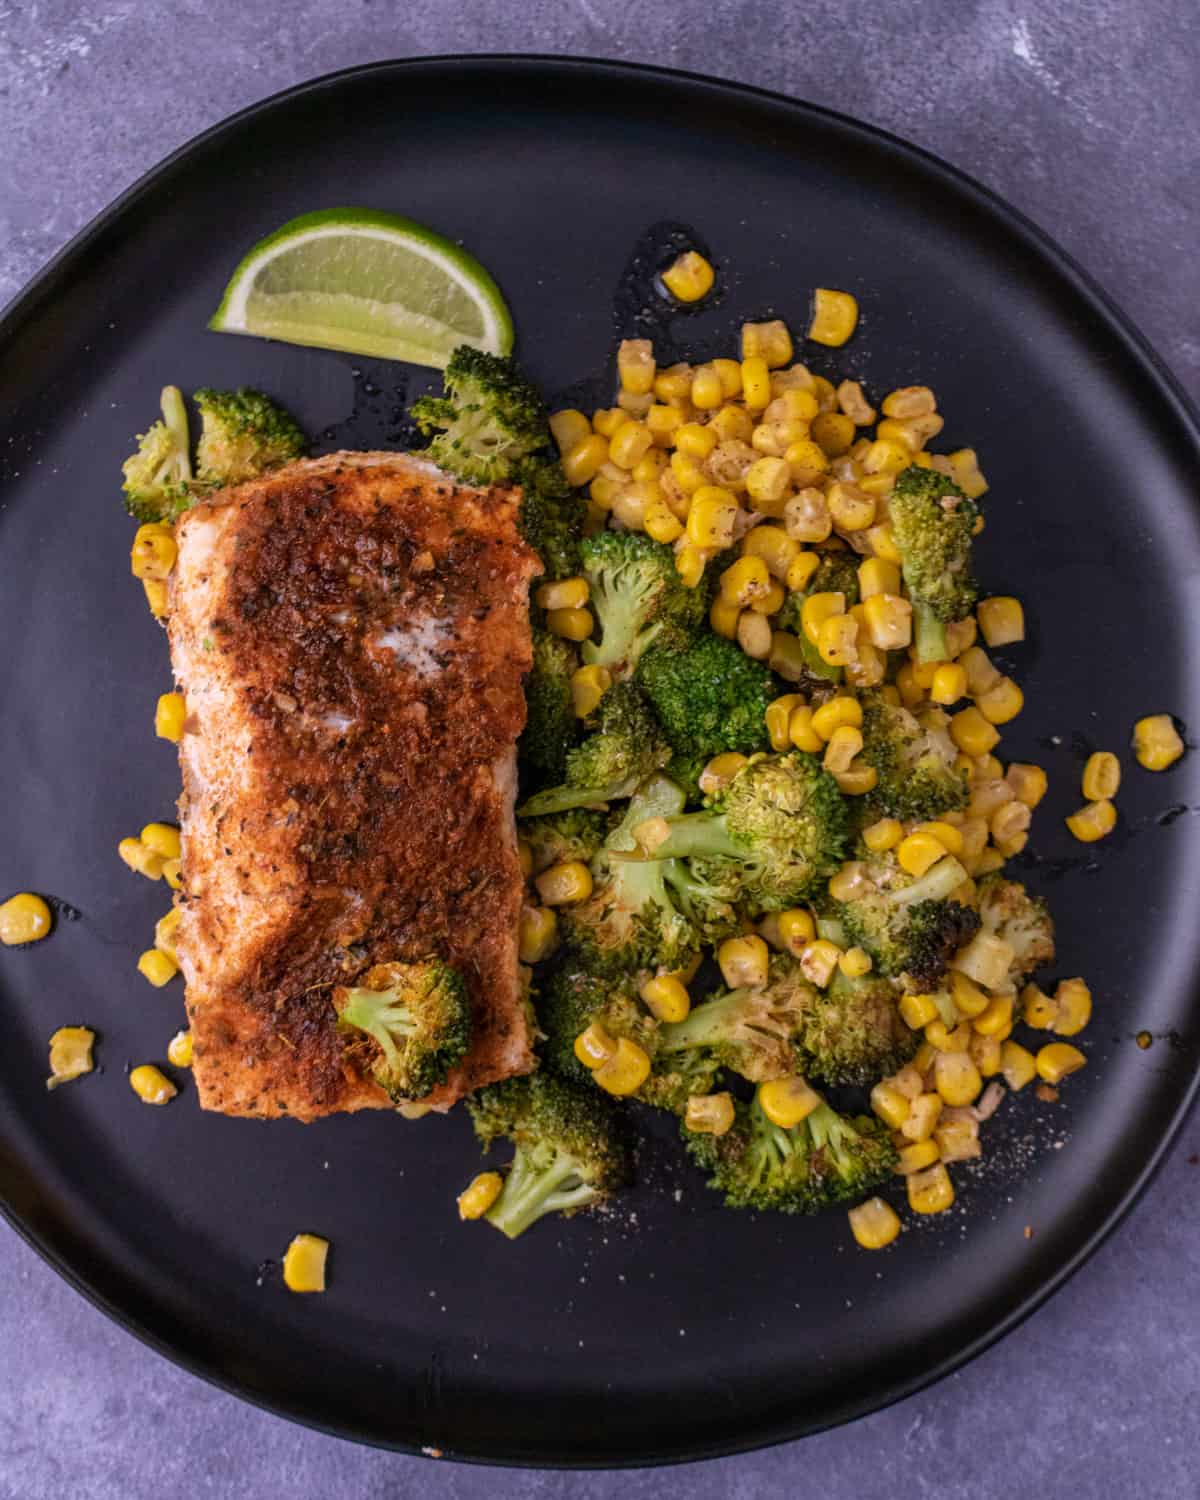 Cajun salmon on a black plate next to steamed broccoli and corn. A fresh slice of lime is above the salmon on the plate.